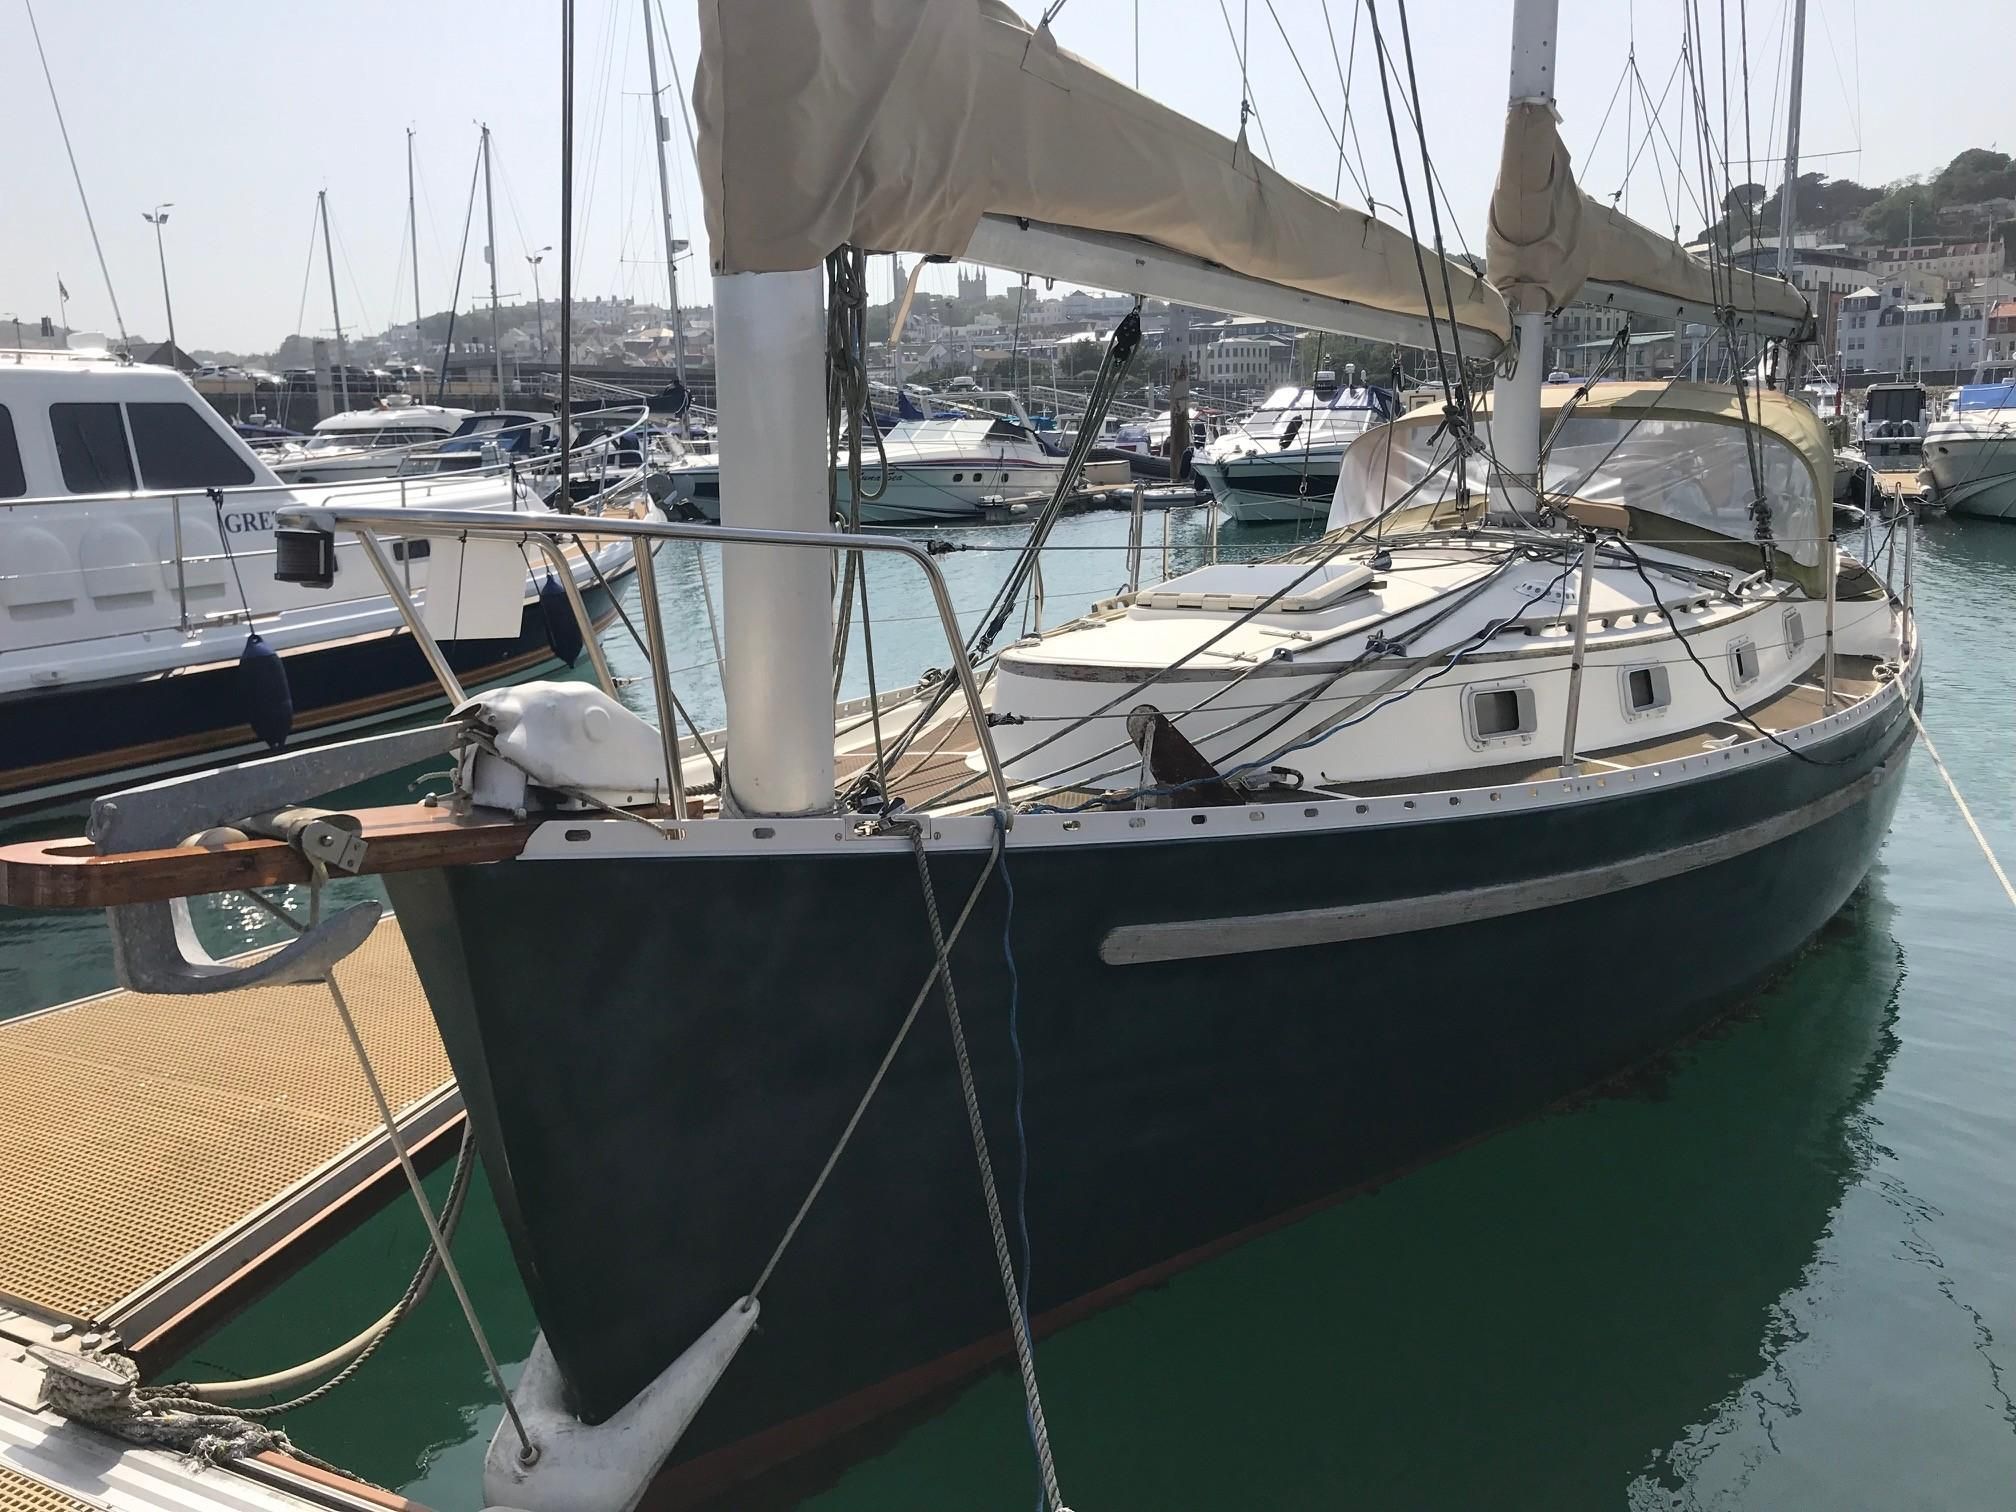 35ft yacht for sale uk